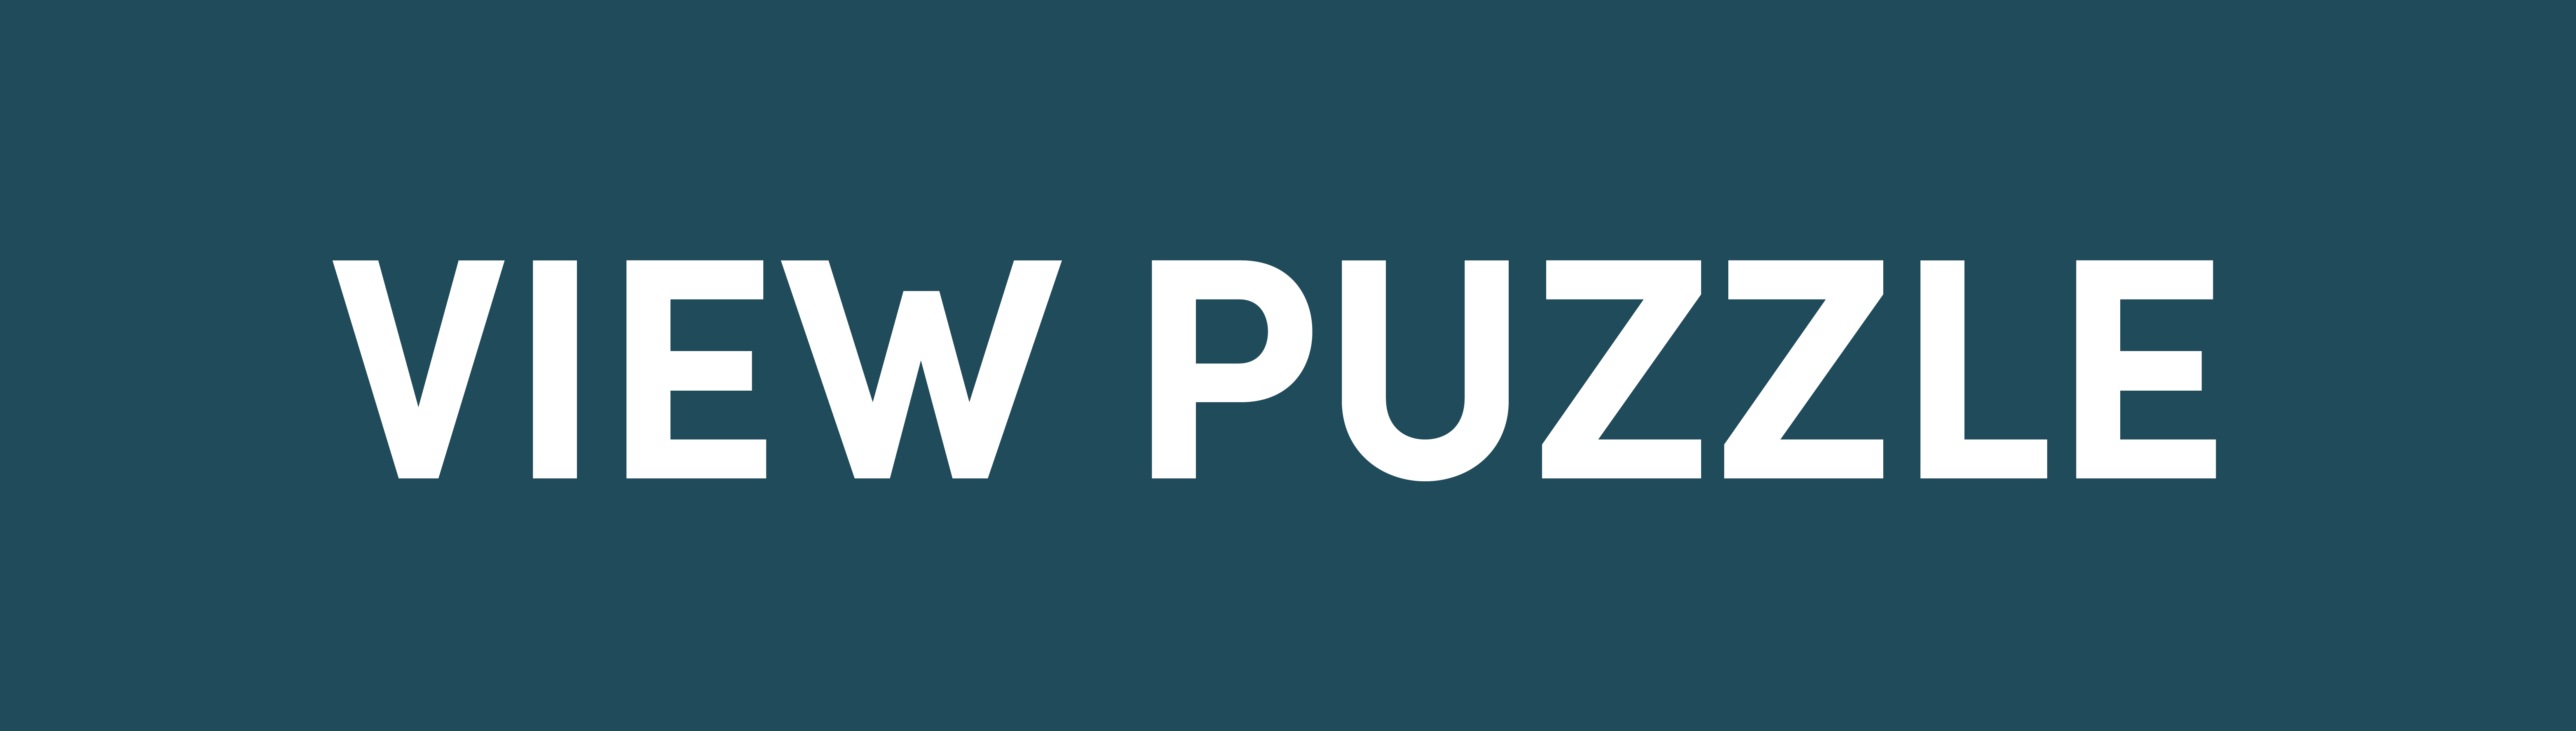 View Puzzle Call to Action Button